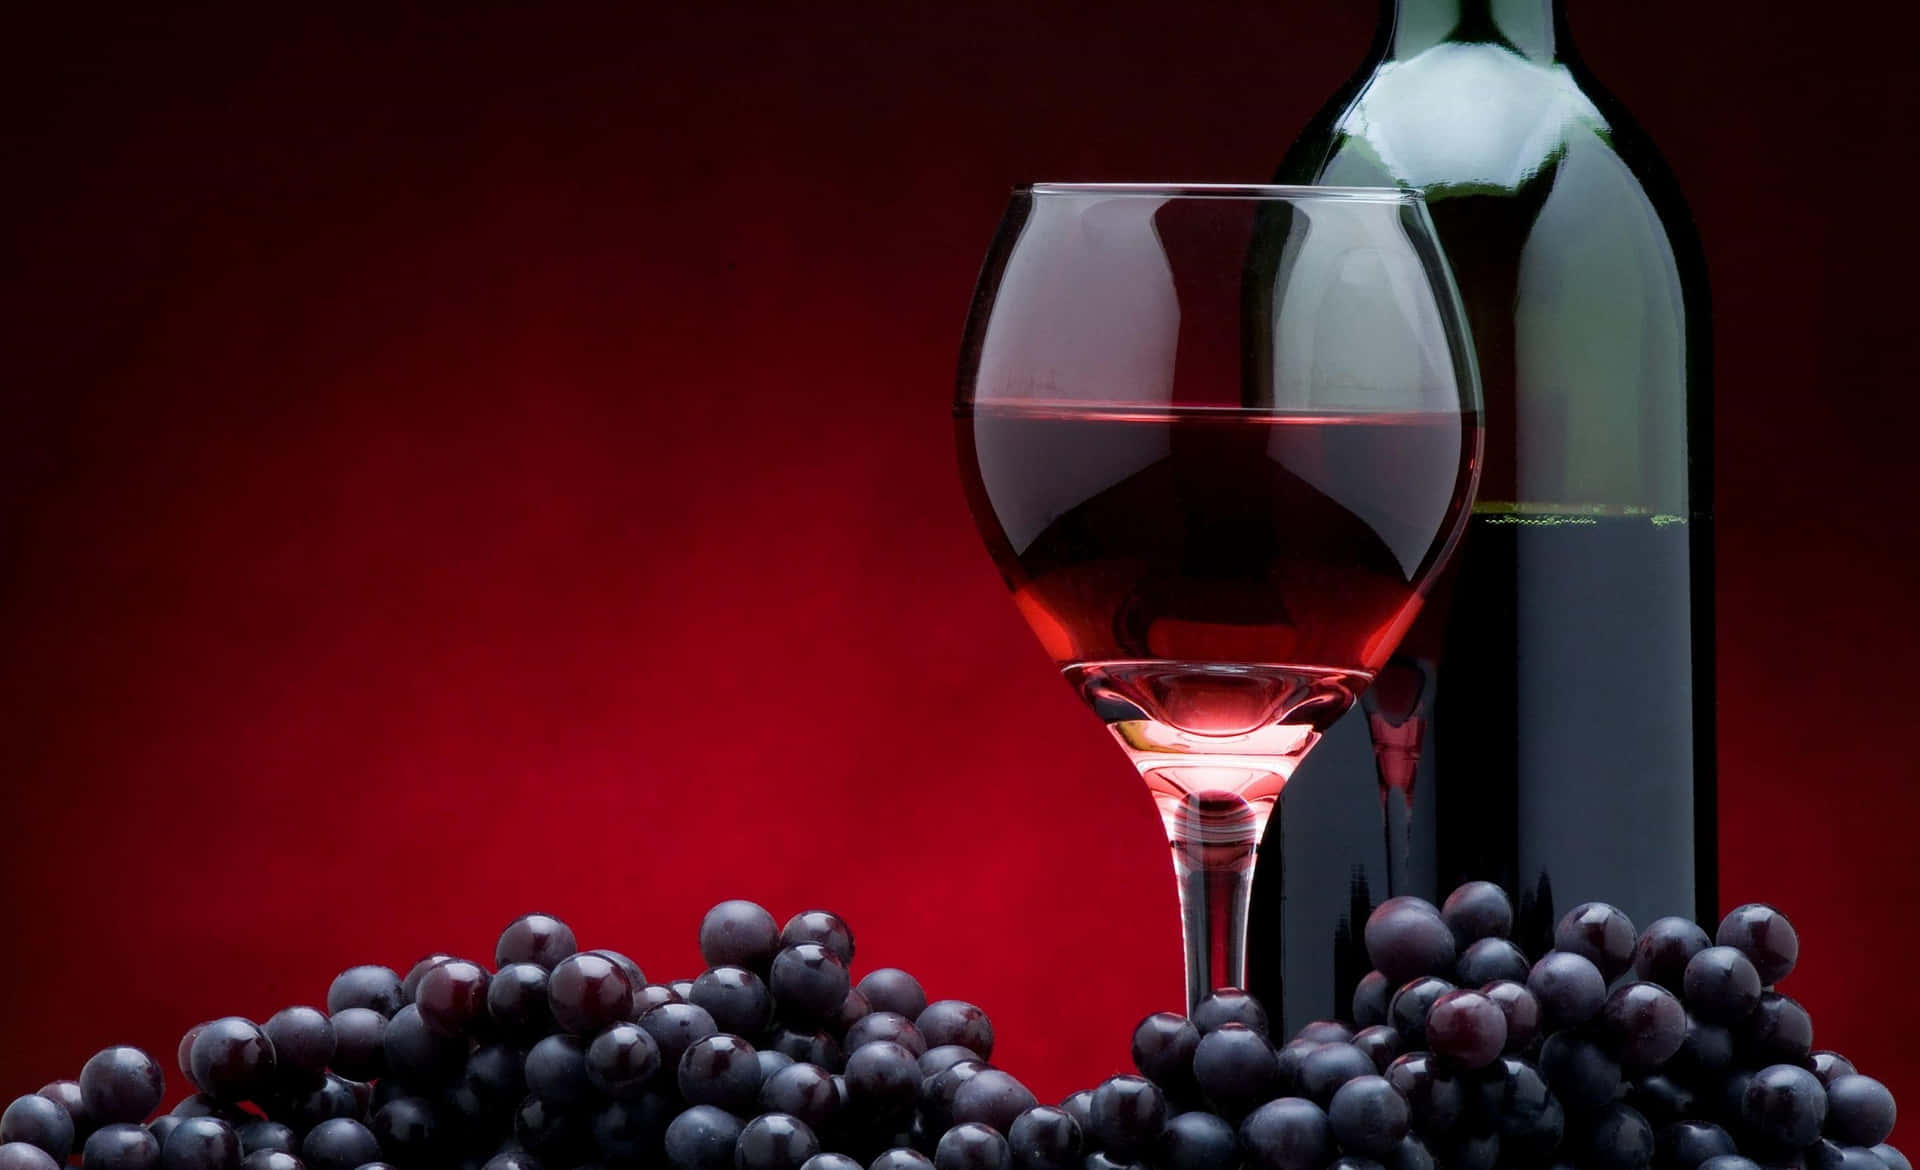 A Luxurious Pour - An Astounding Display of Red Wine in a Glass Wallpaper